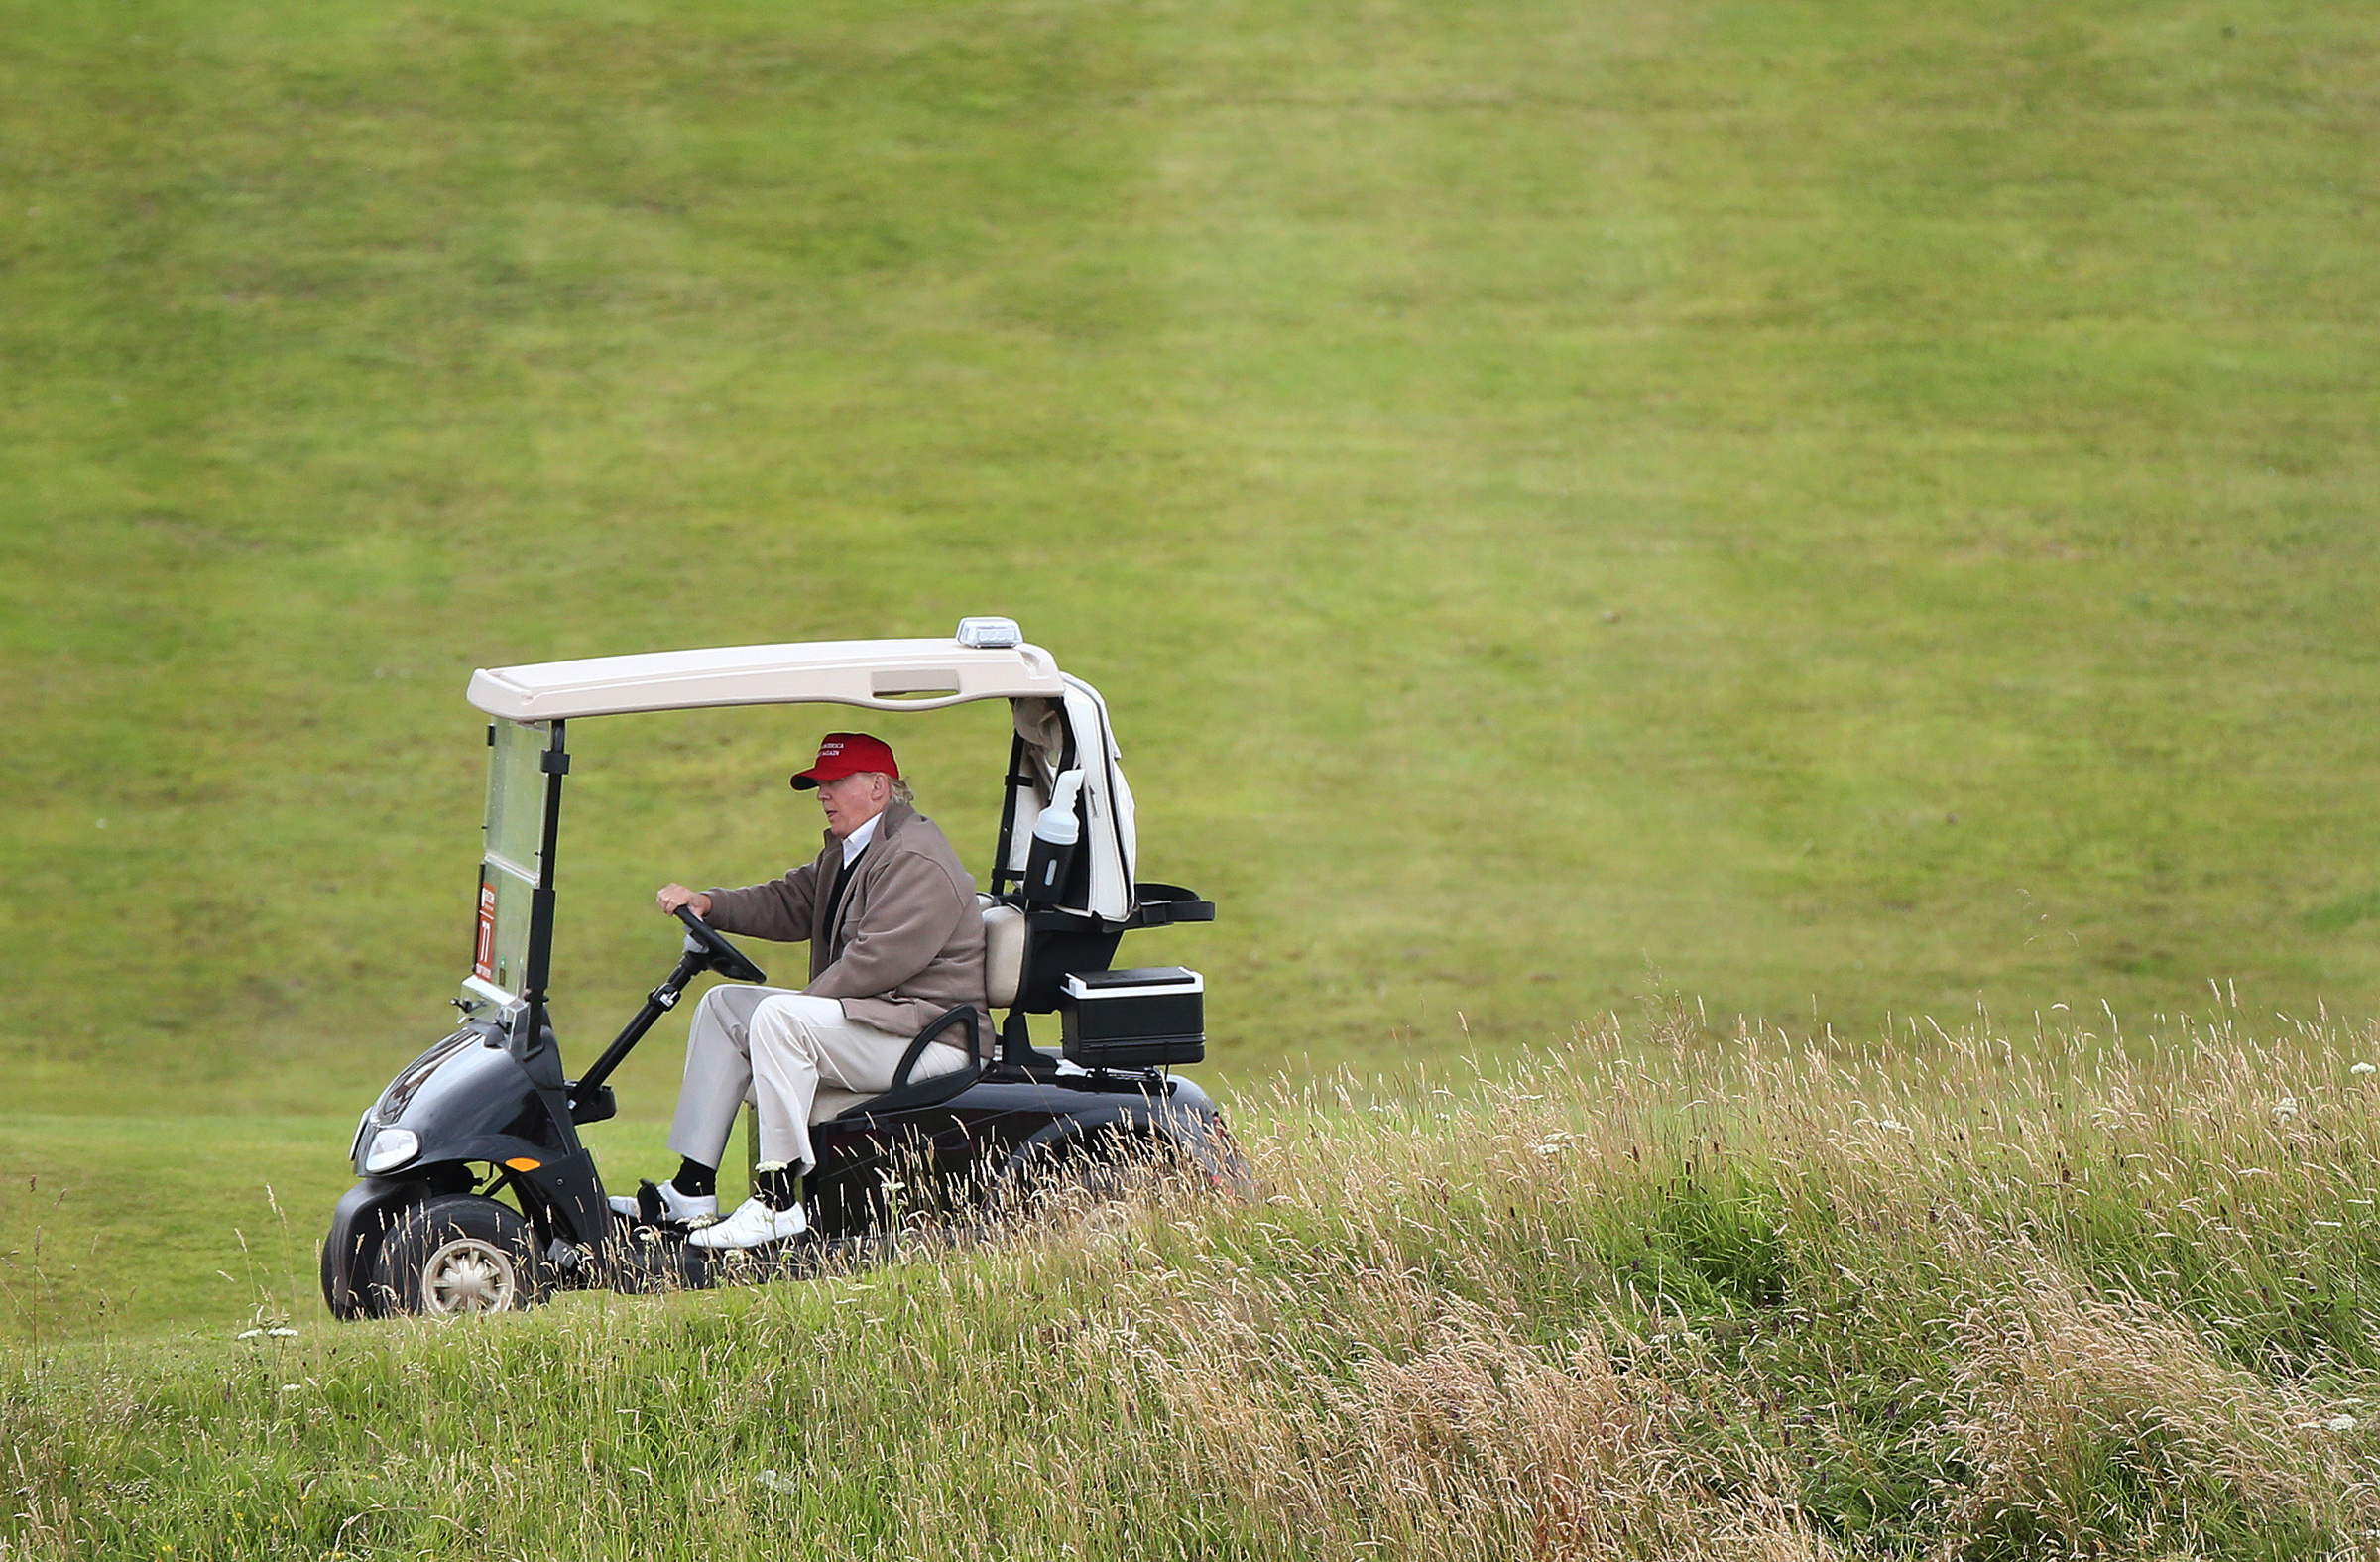 Donald Trump drives his golf buggy during the second day of the 2015 Women's British Open golf championship on the Turnberry golf course in Scotland. (Scott Heppell—AP)